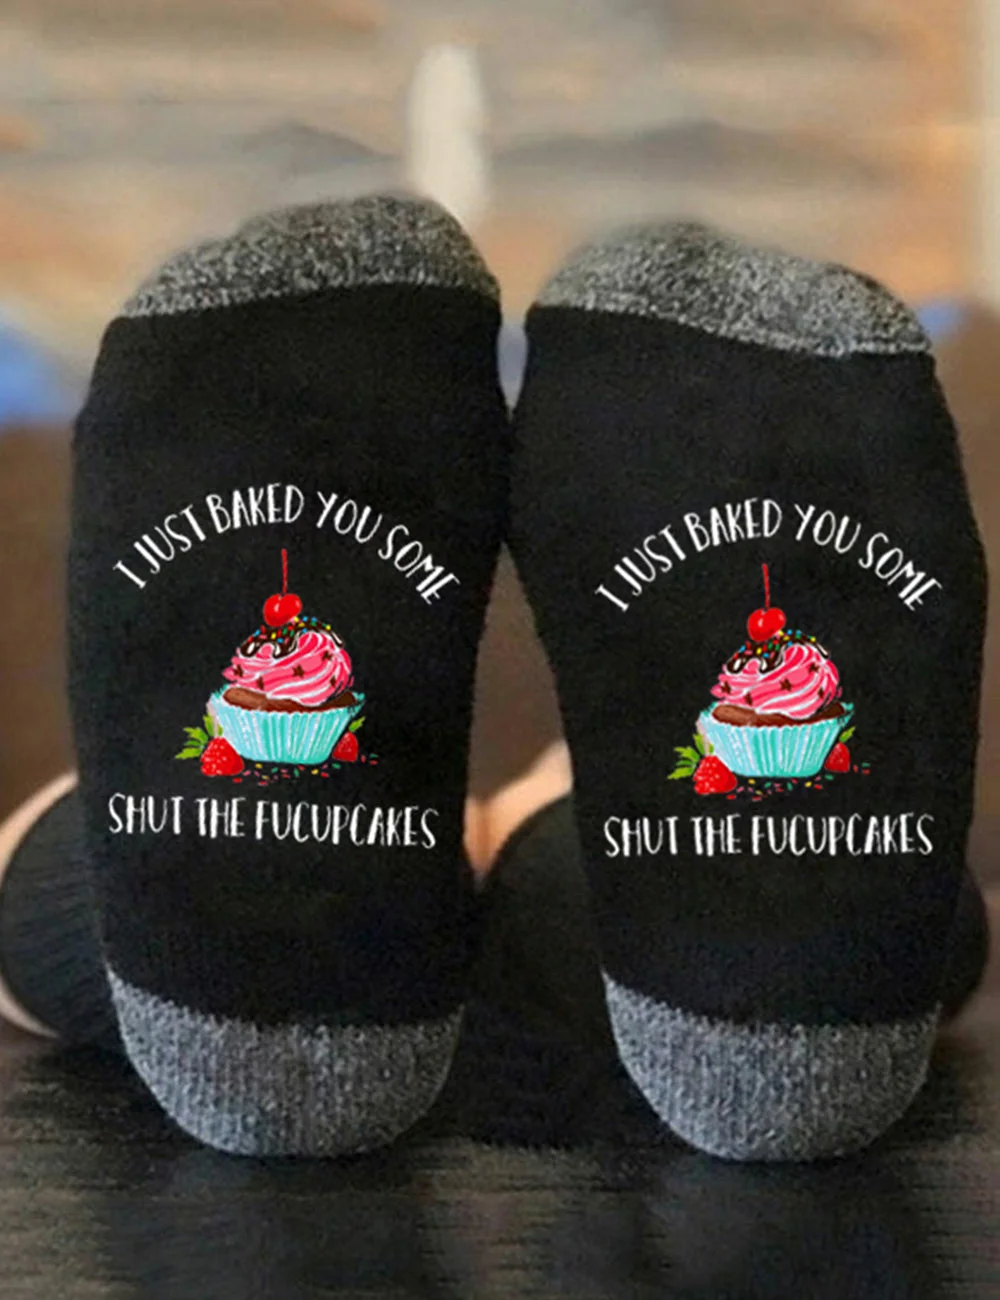 Lizzic I Just Baked You Some Shut The Fucupcakes Socks